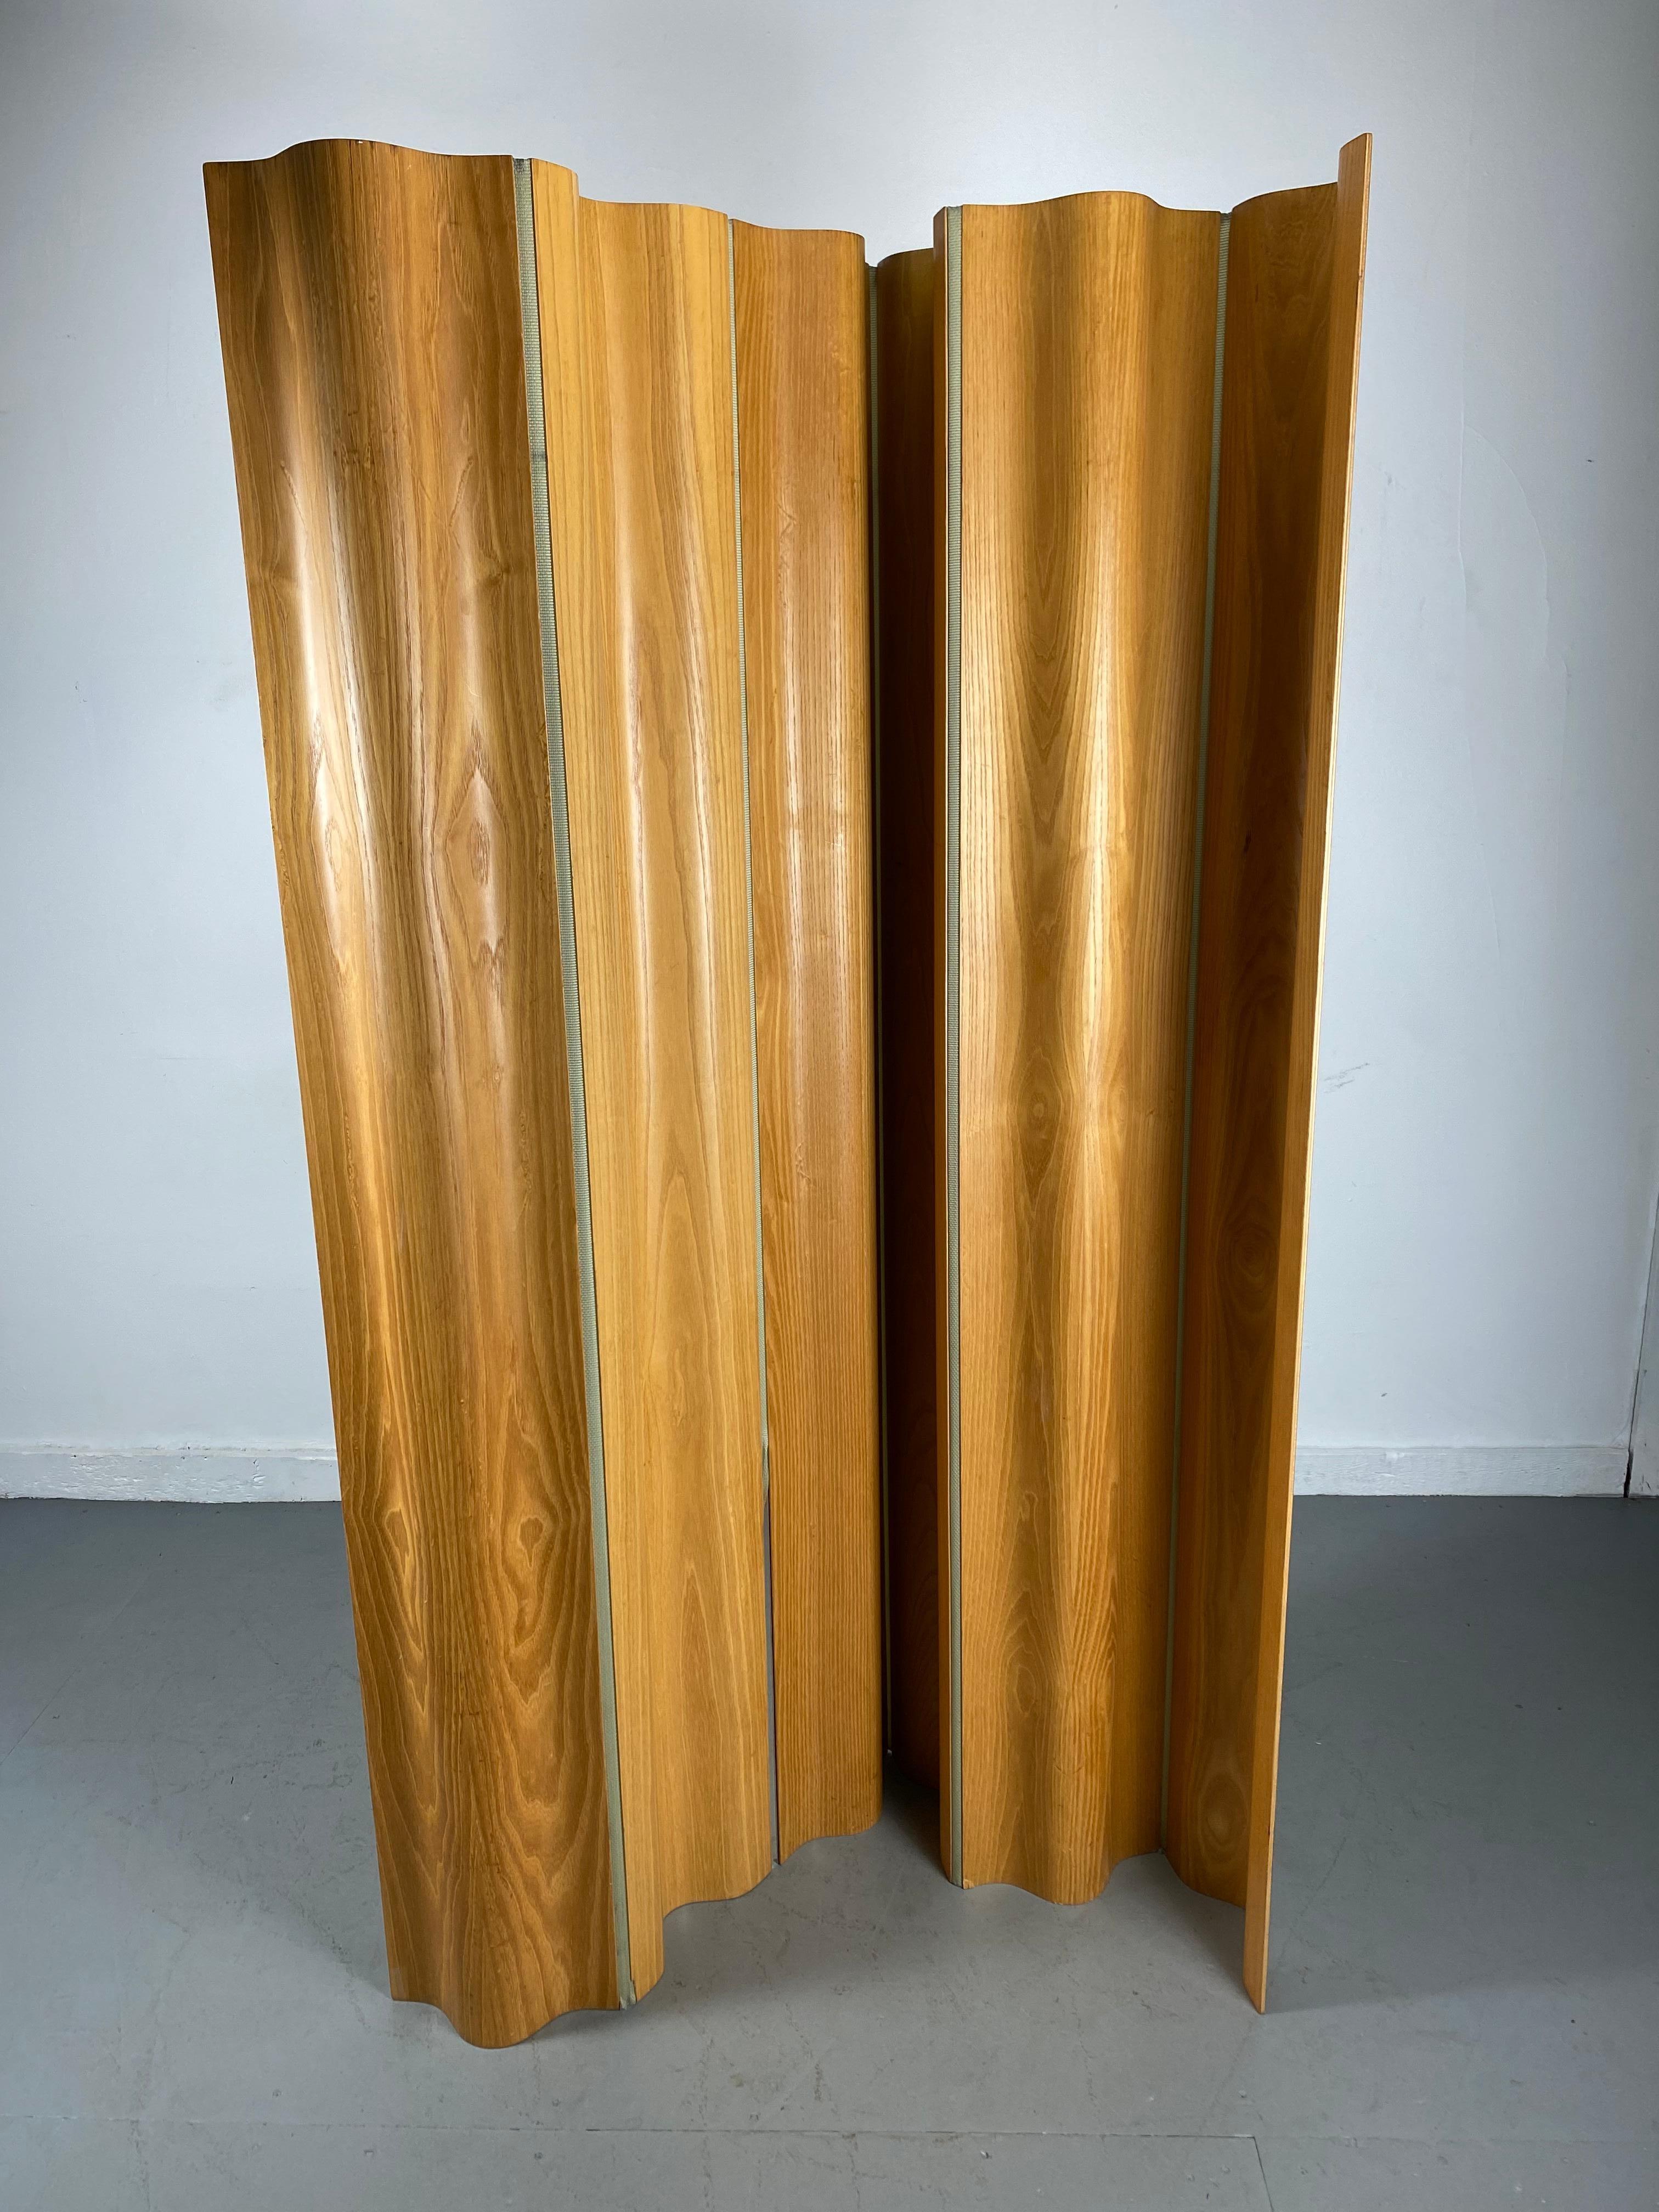 Late 20th Century Charles and Ray Eames Plywood Folding Screen / Divider, , F S 6, , , Herman Miller